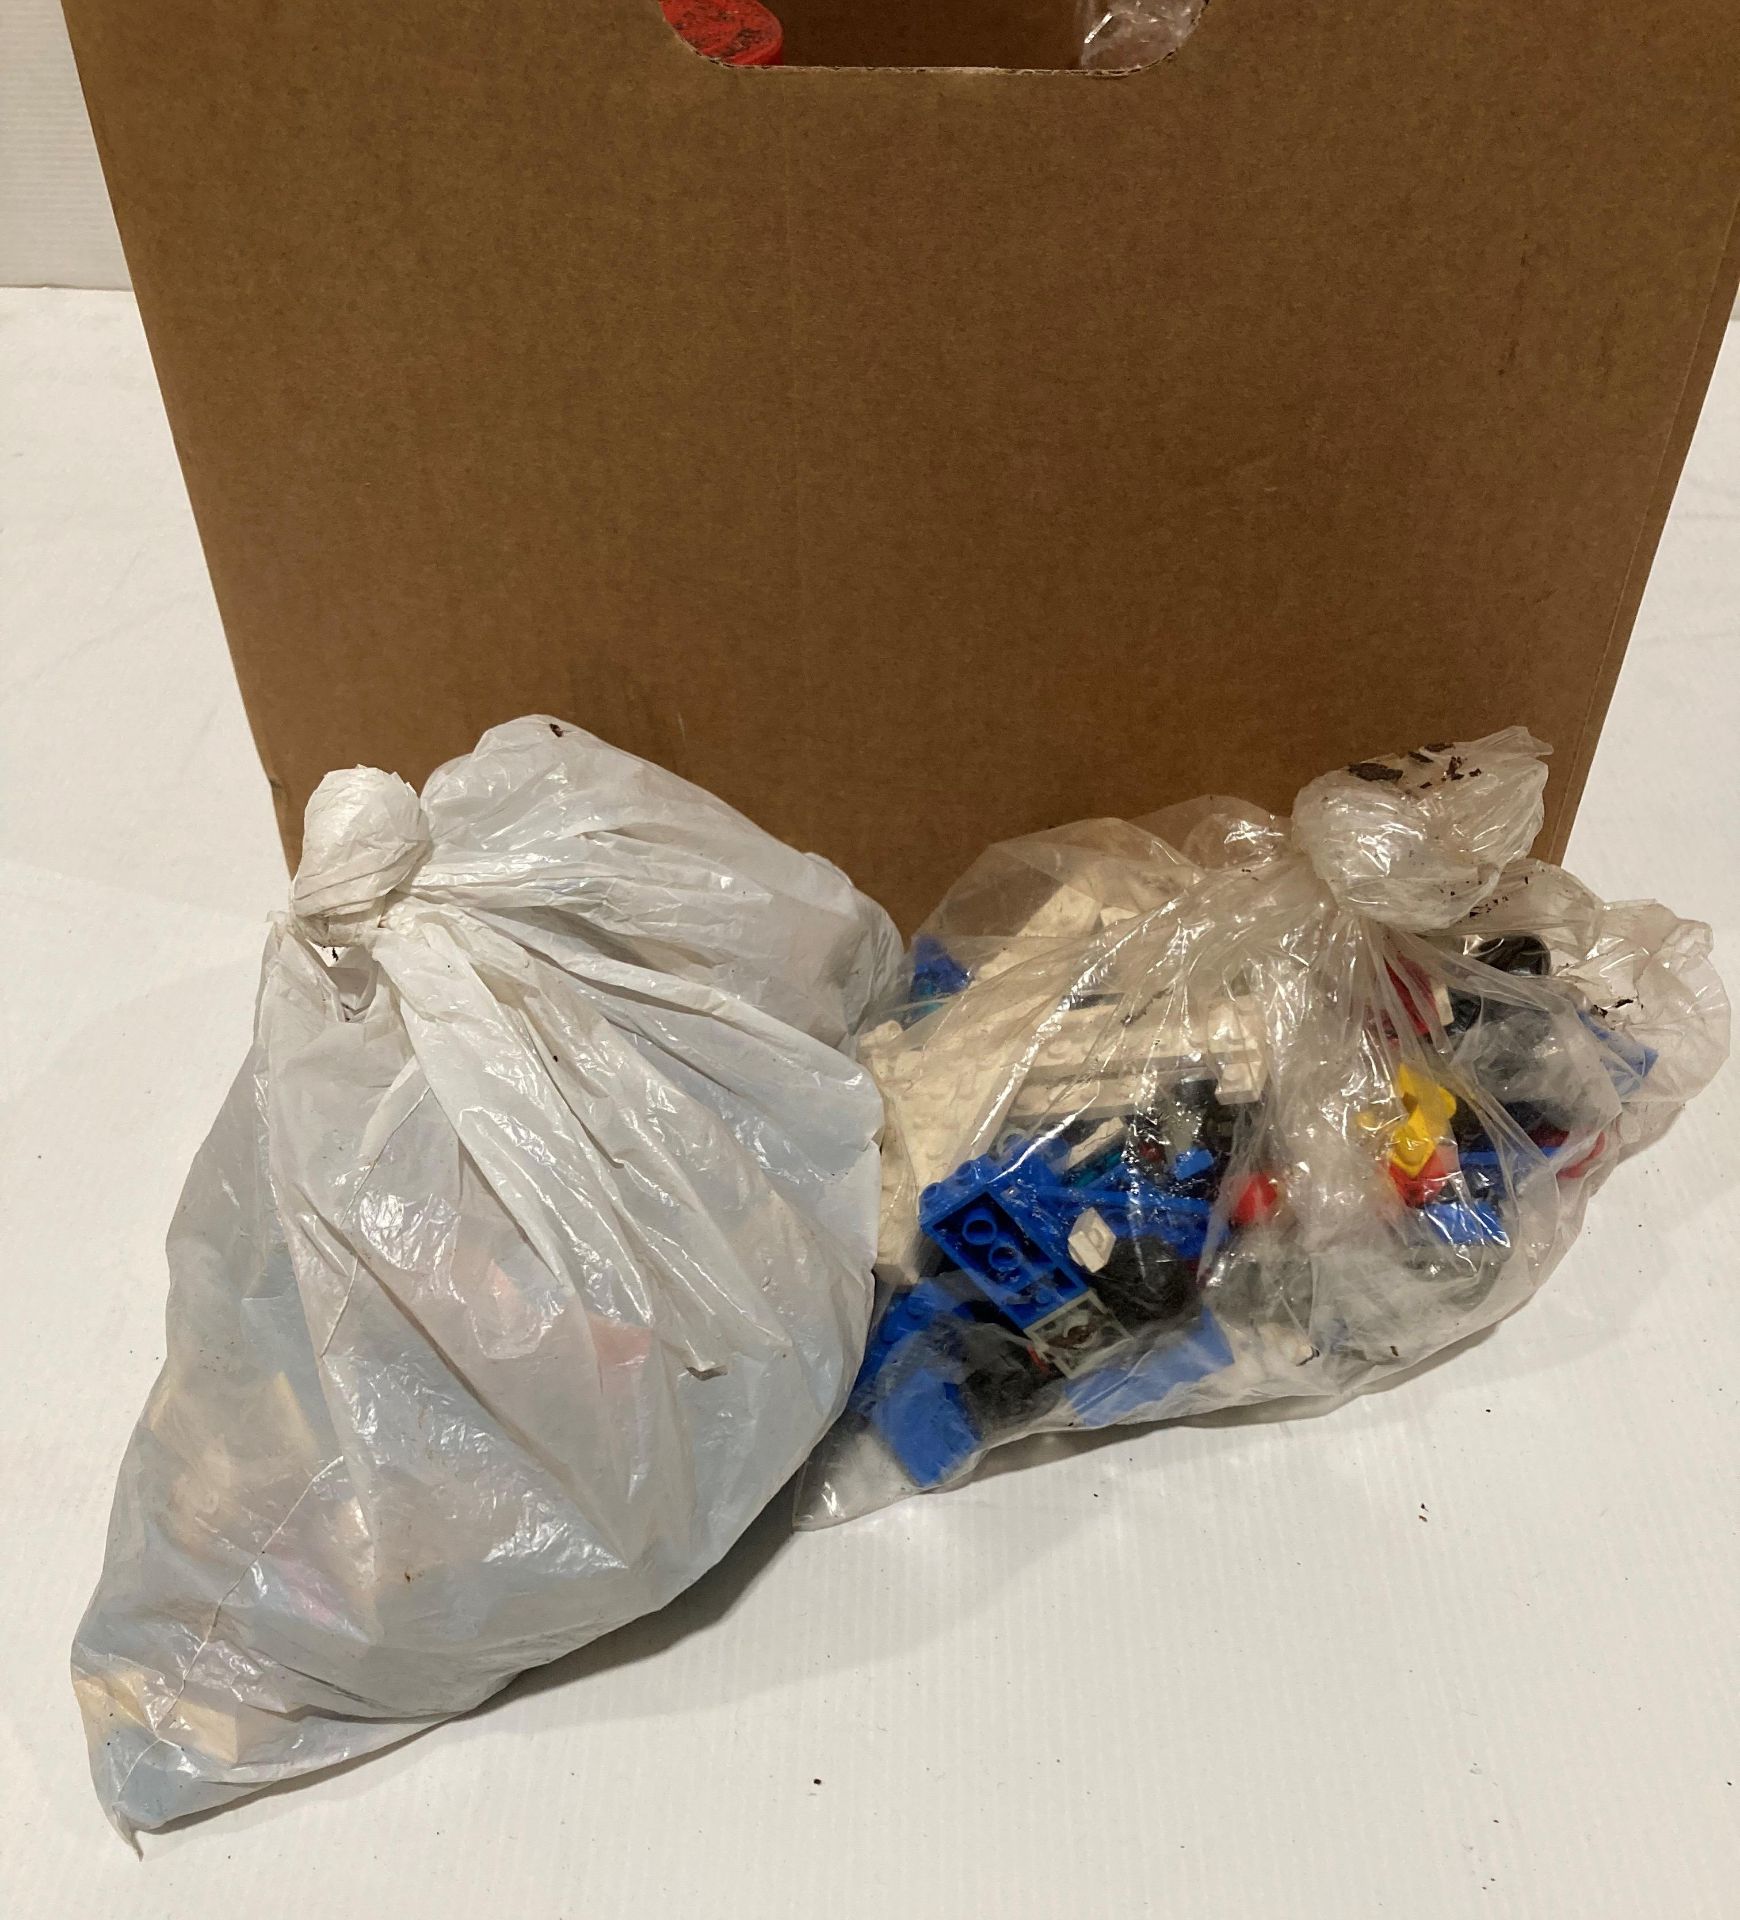 Contents to box - assorted Lego and other building blocks, etc. - Image 2 of 2